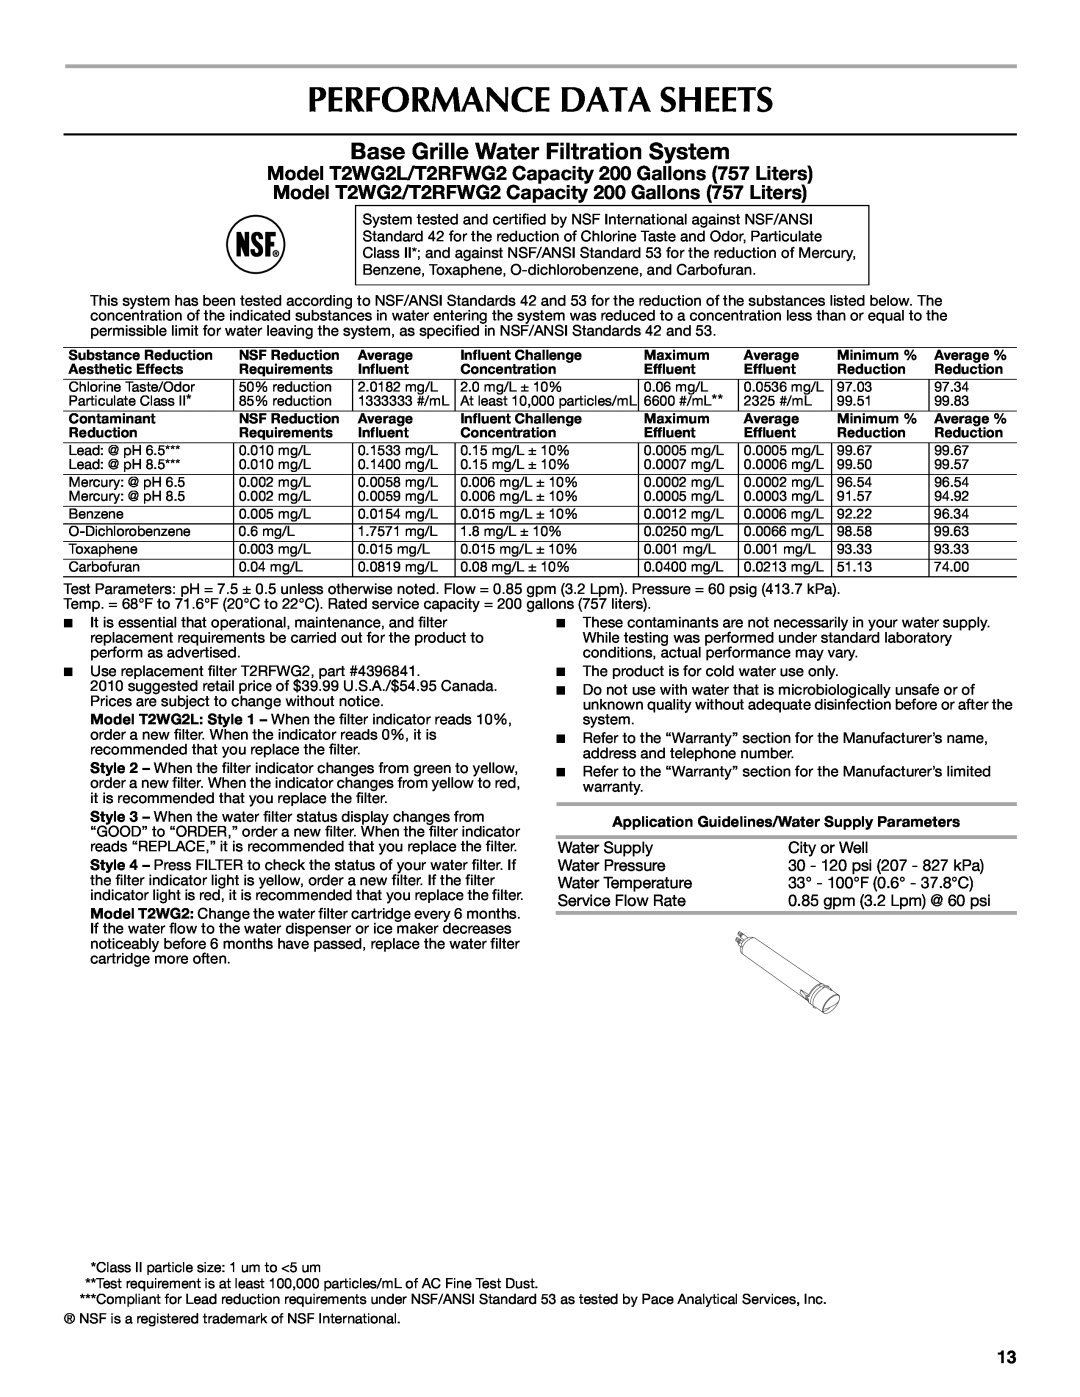 Maytag W10321478A installation instructions Performance Data Sheets, Base Grille Water Filtration System 